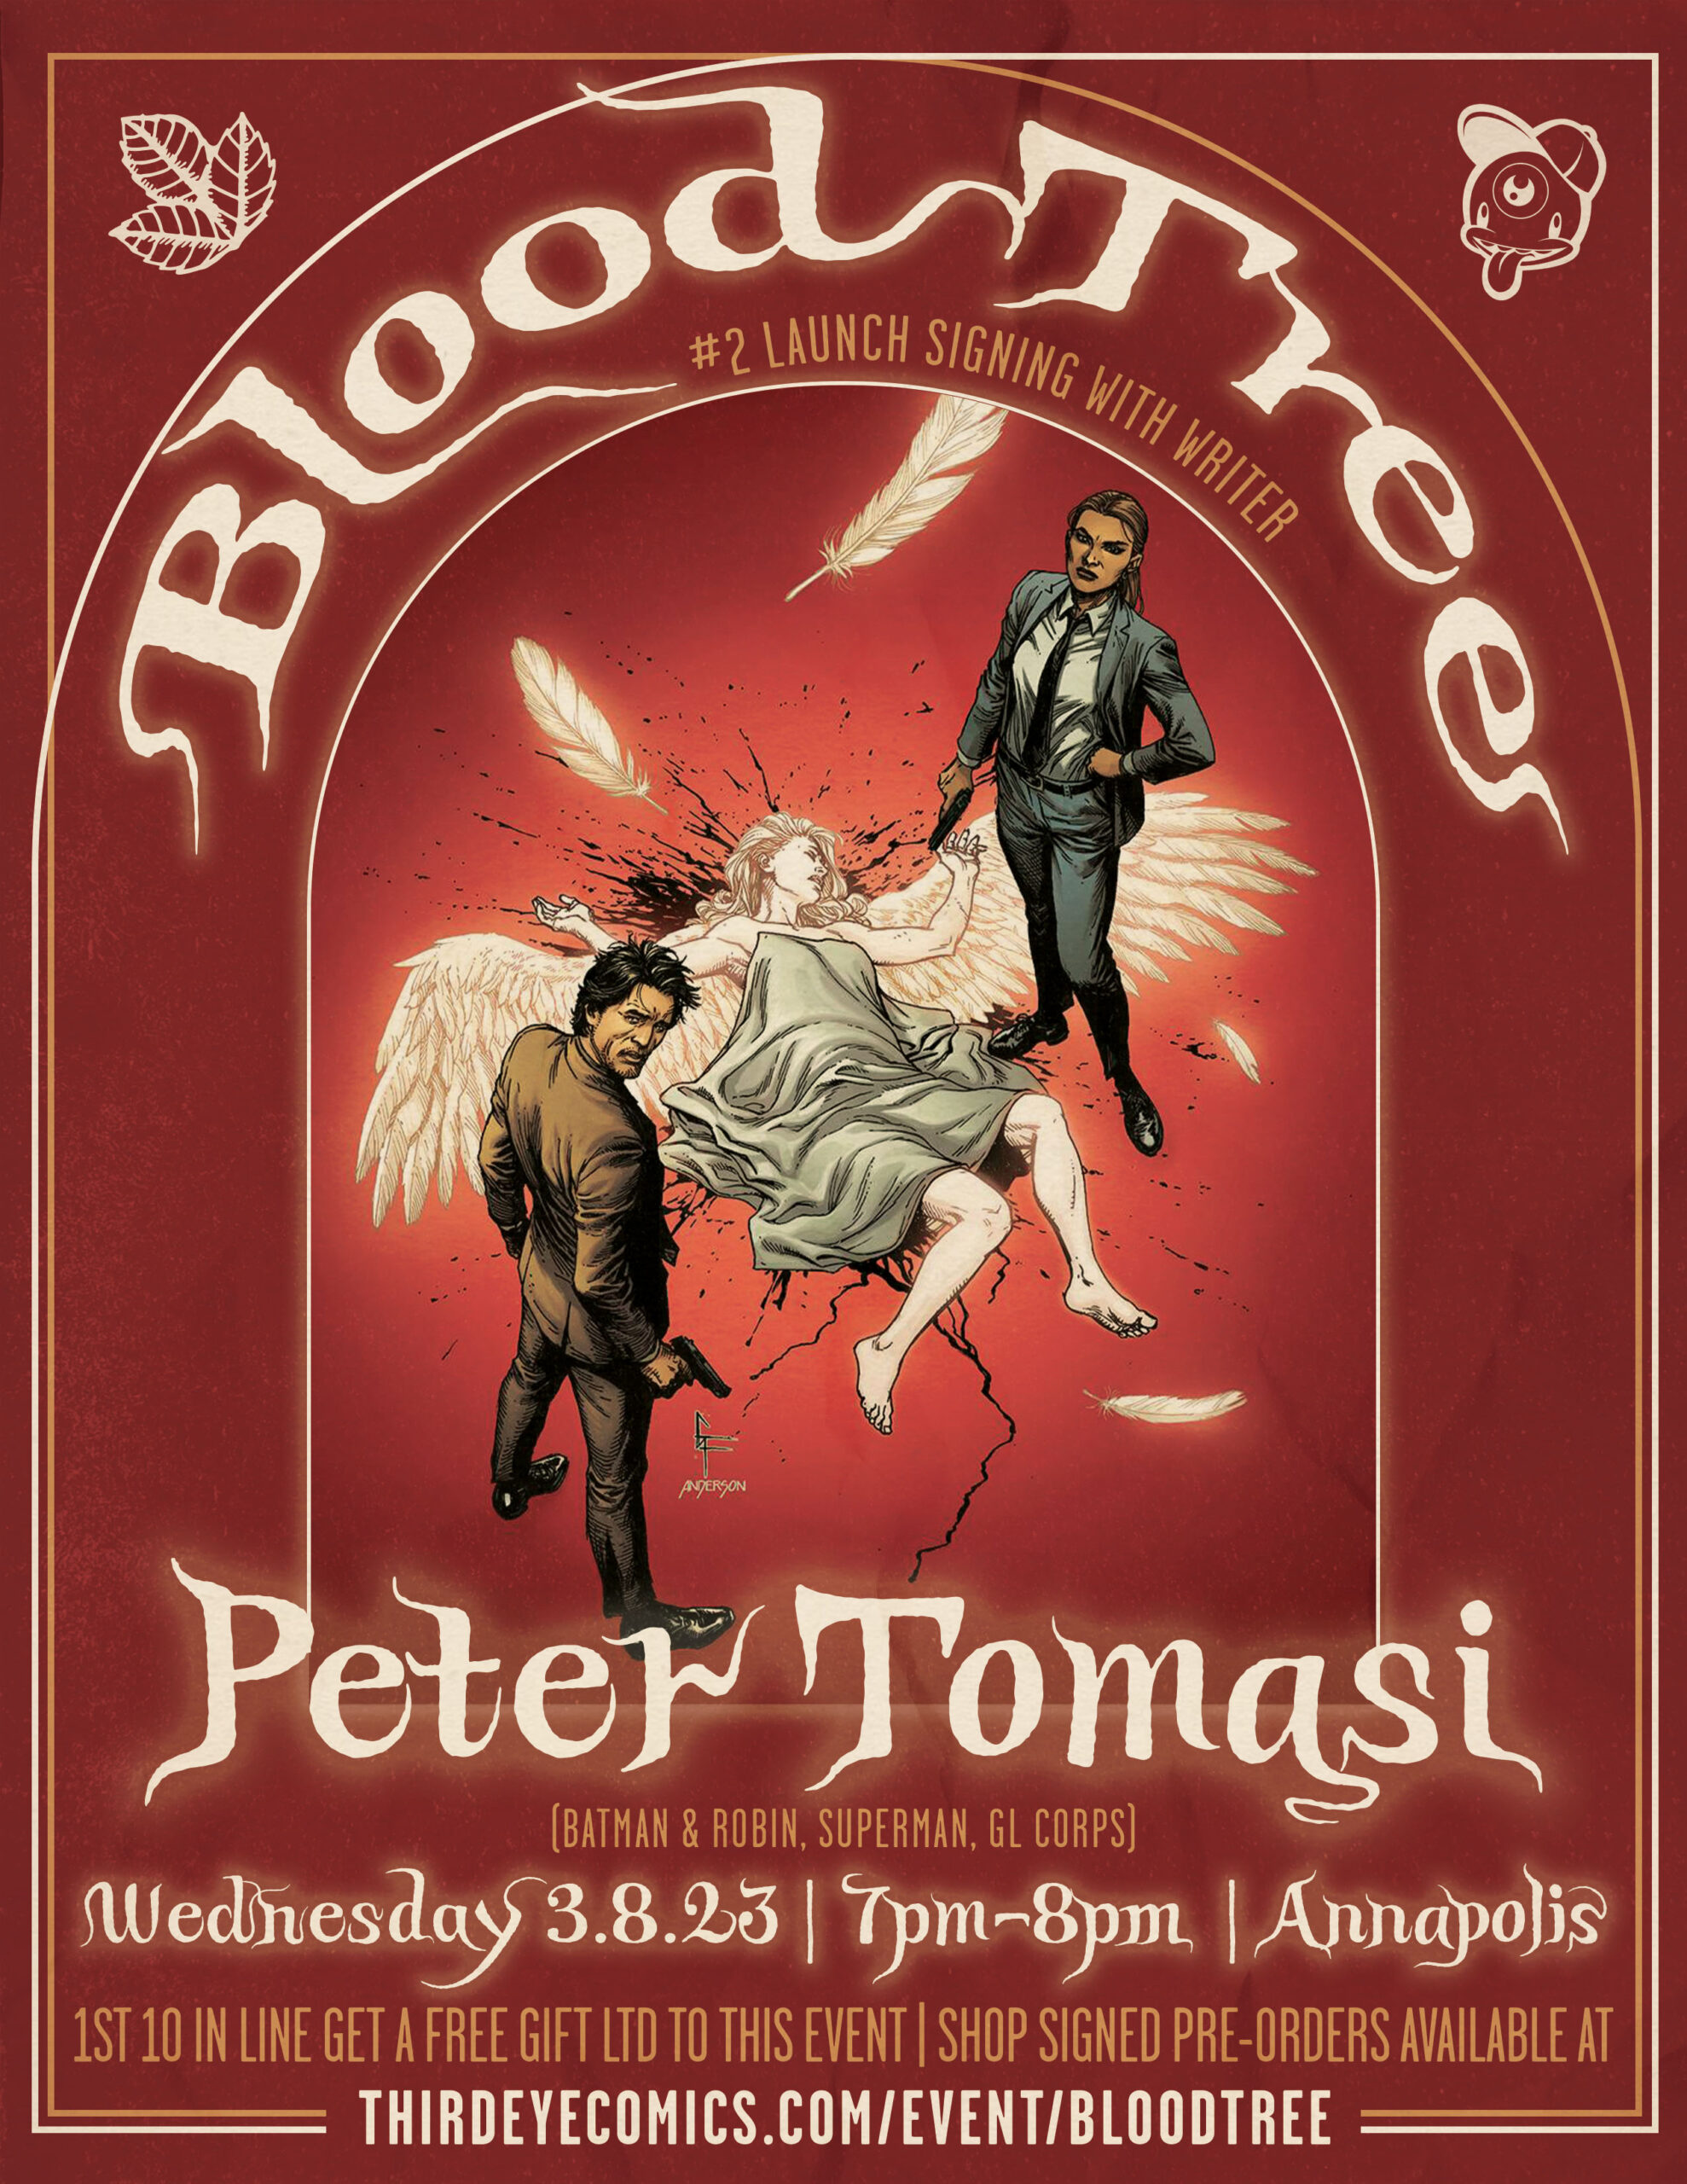 Blood Tree #2 launch signing flyer